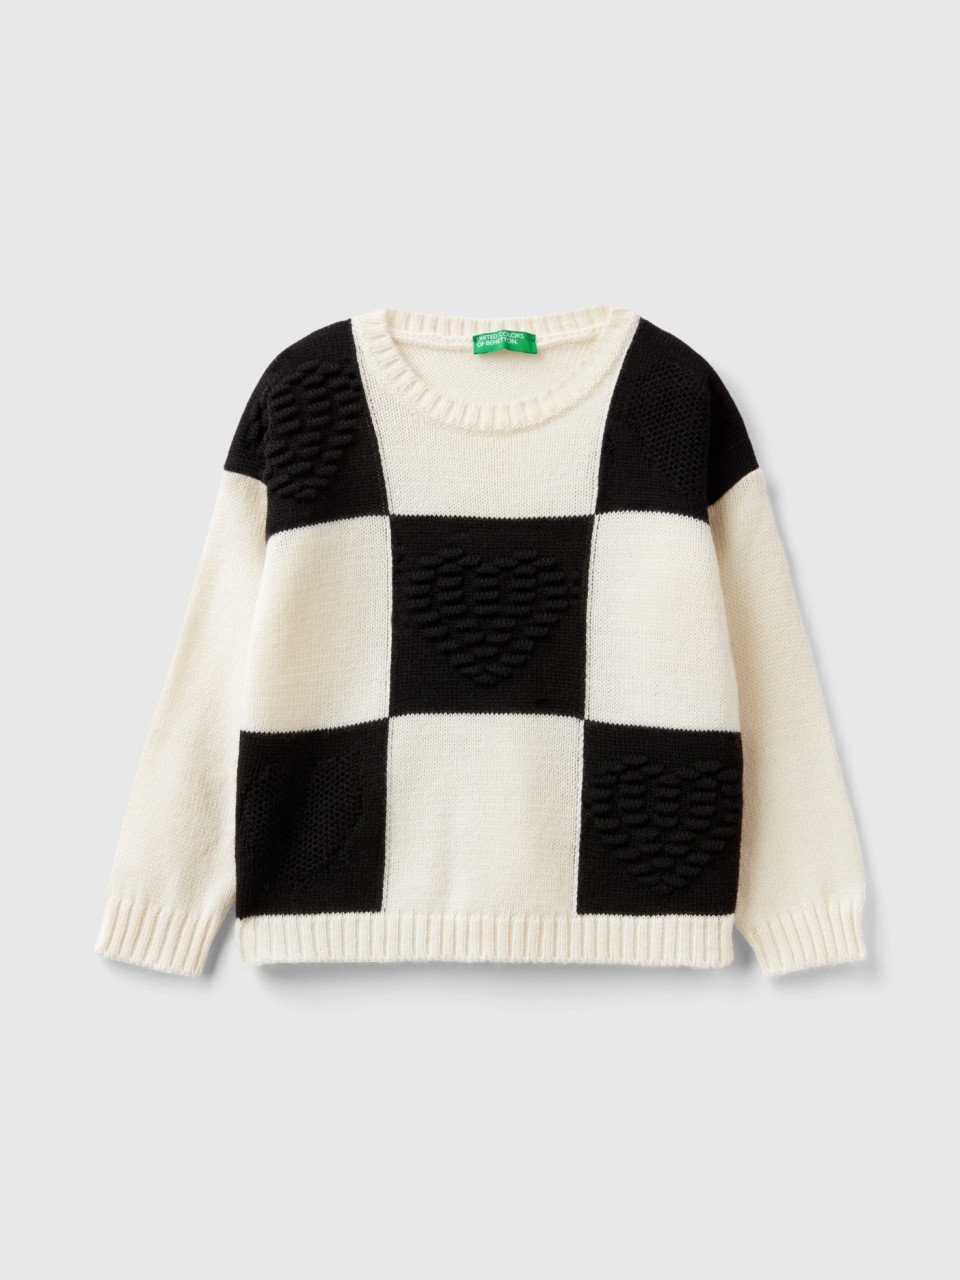 Benetton, Checkered Sweater With Hearts, Creamy White, Kids